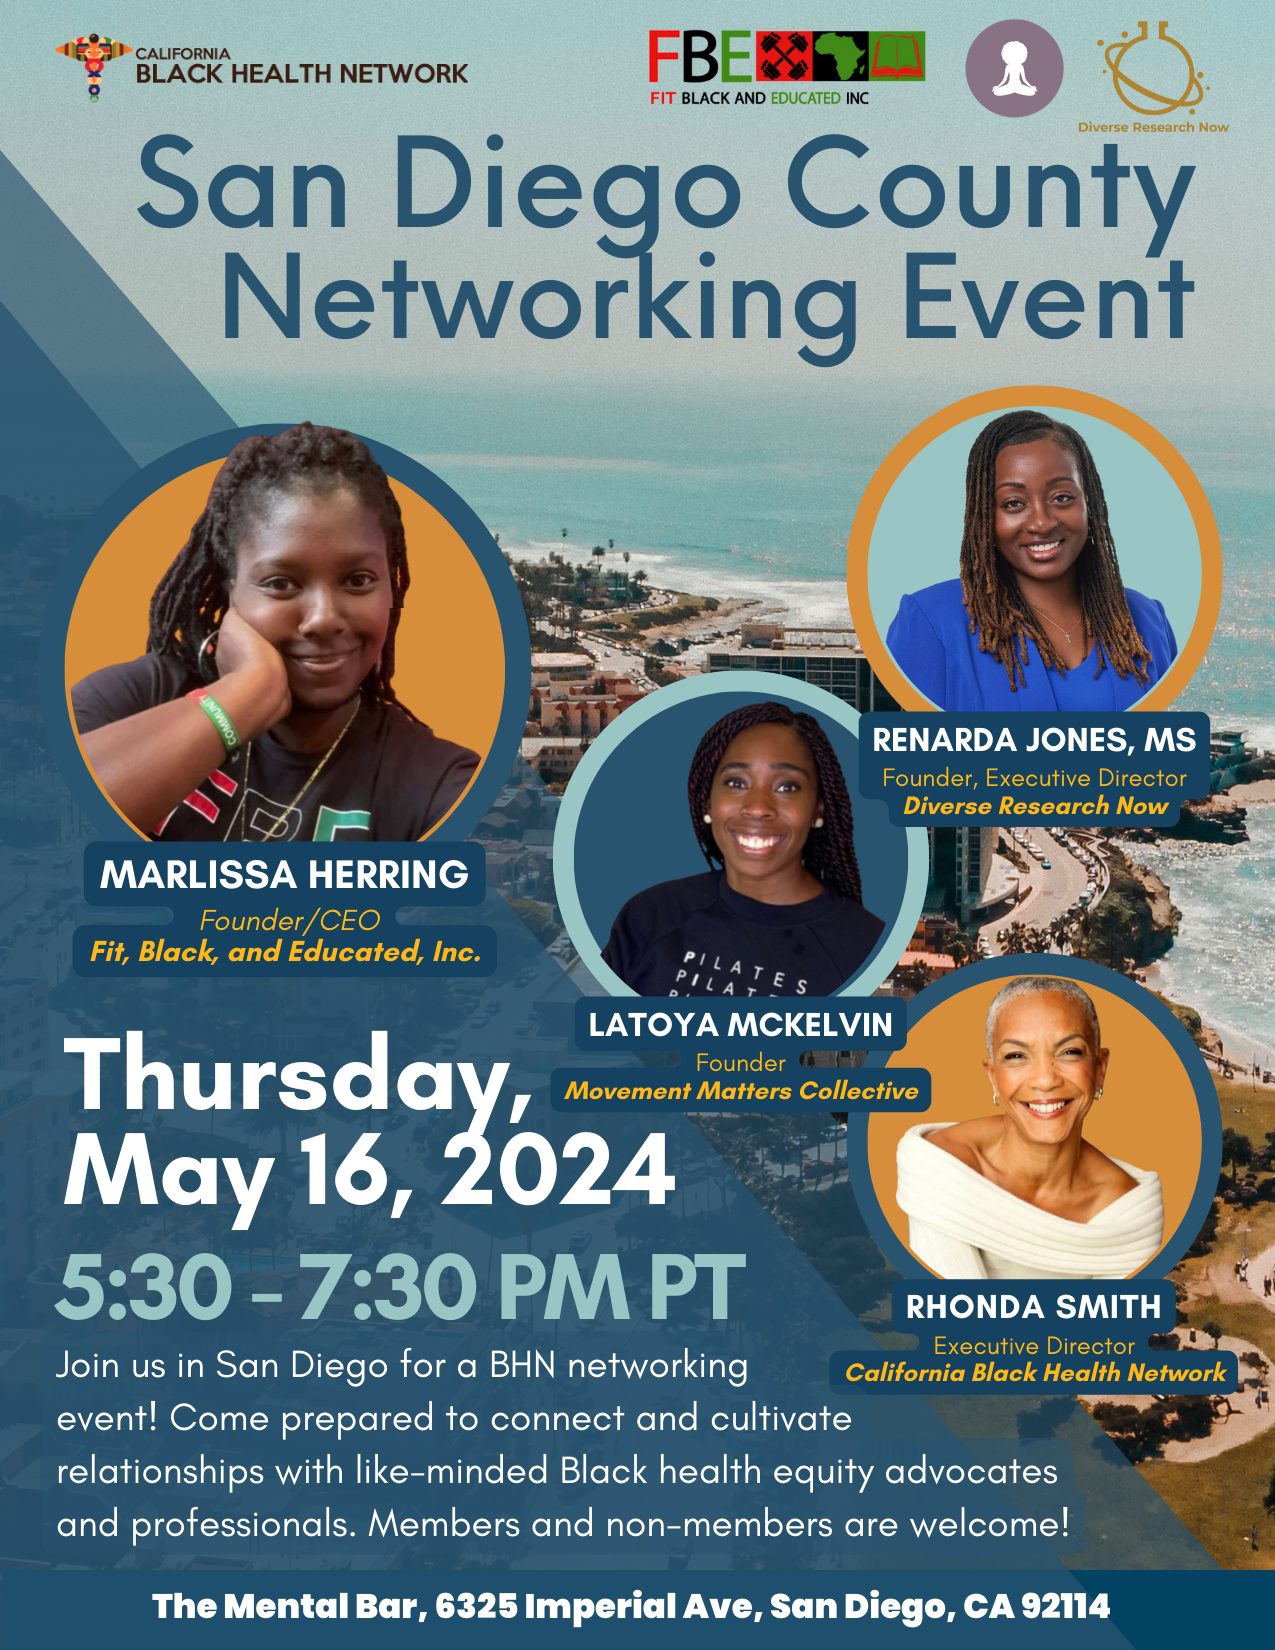 San Diego County BHN Networking Event